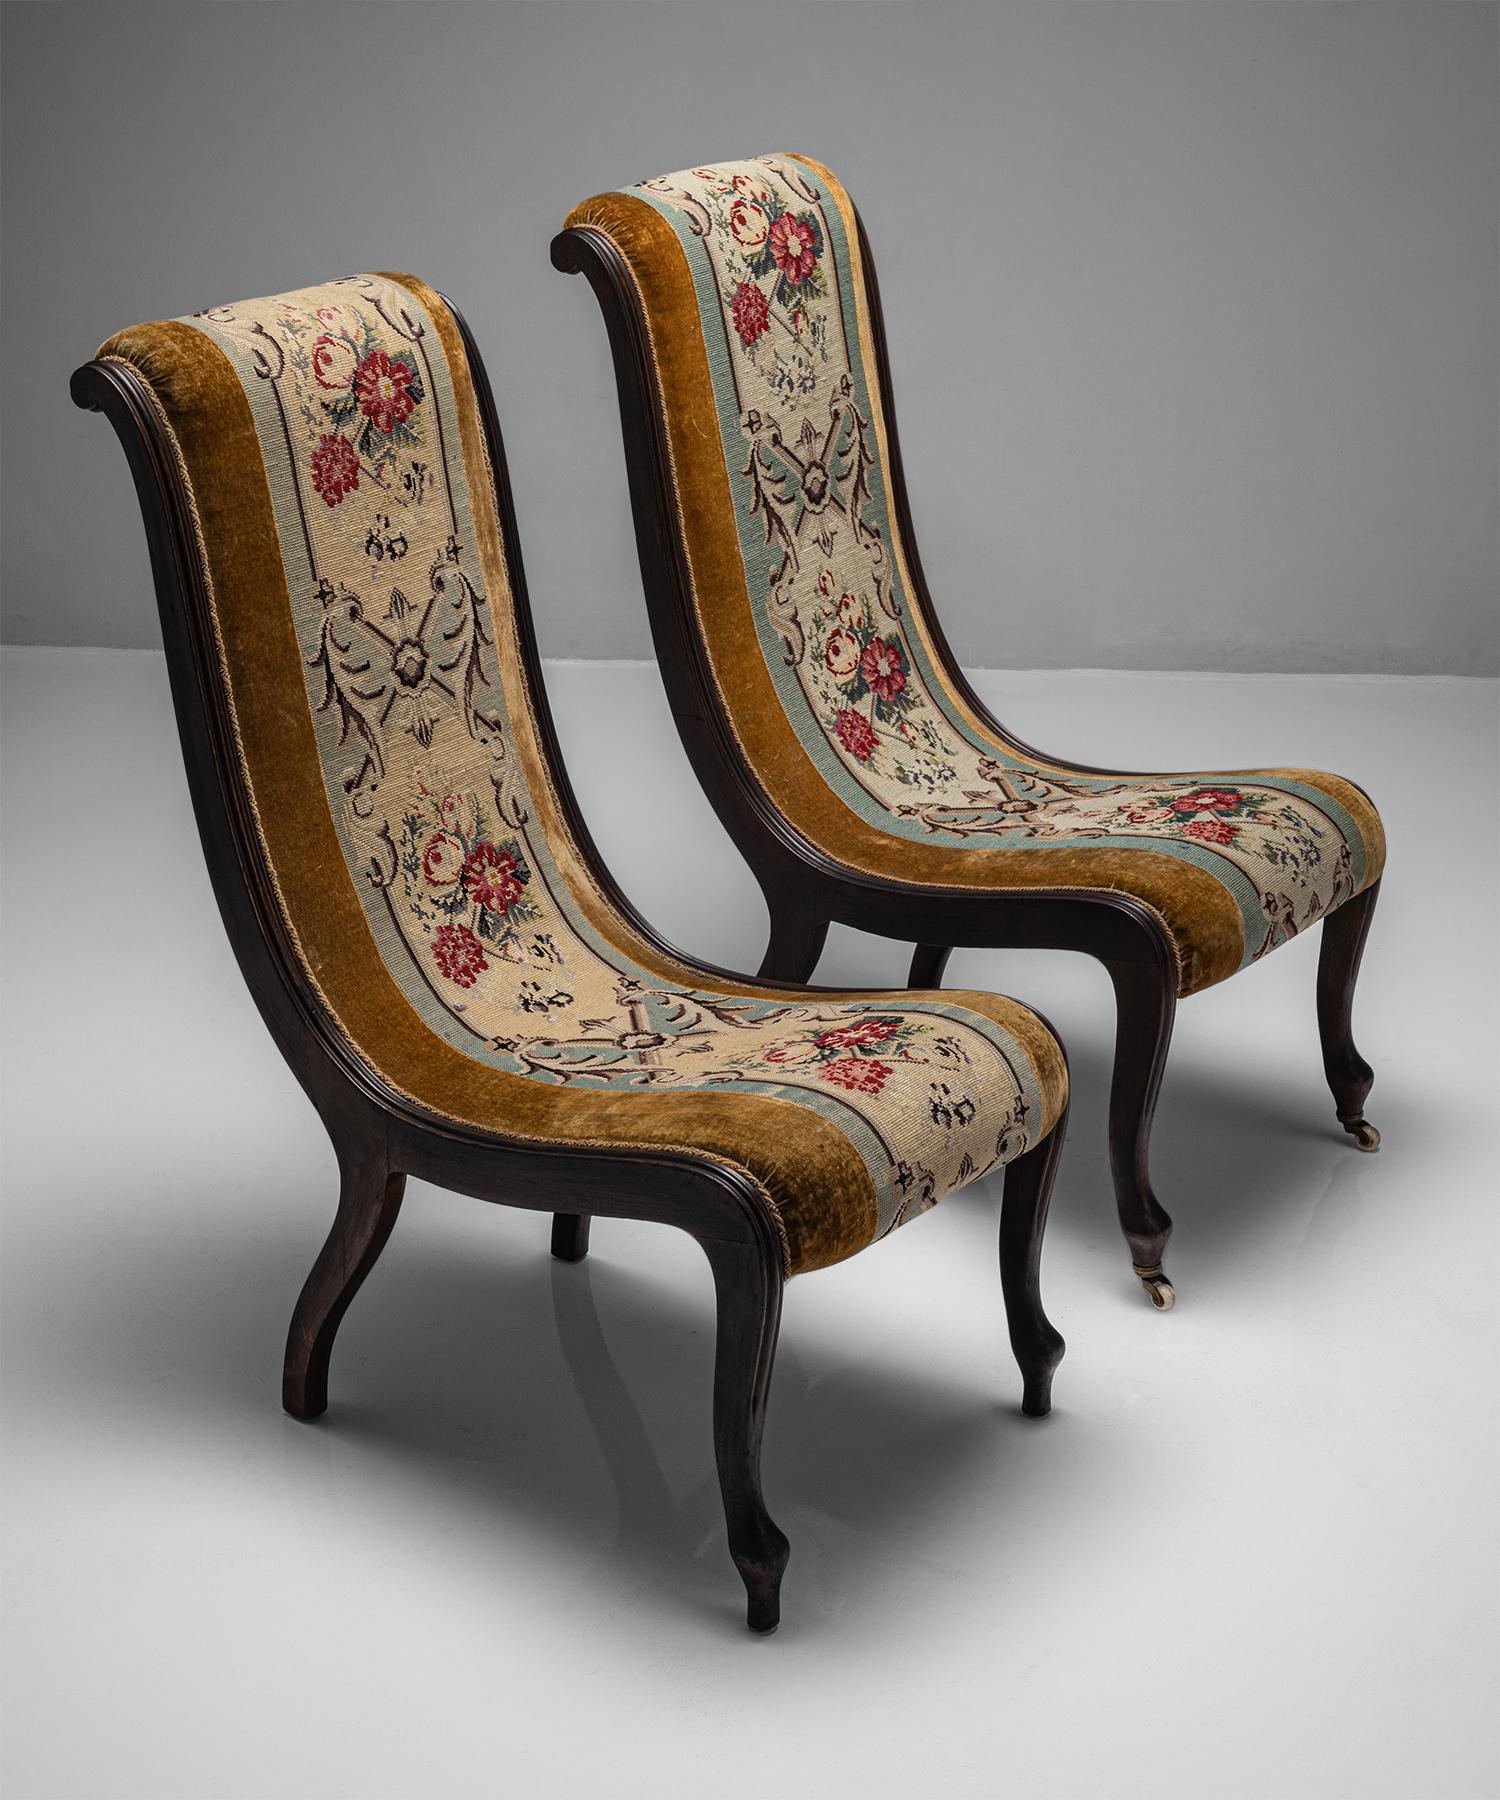 Pair of Elegant Tapestry Chairs

France circa 1880

Beautifully carved frame with original velvet and tapestry panels.